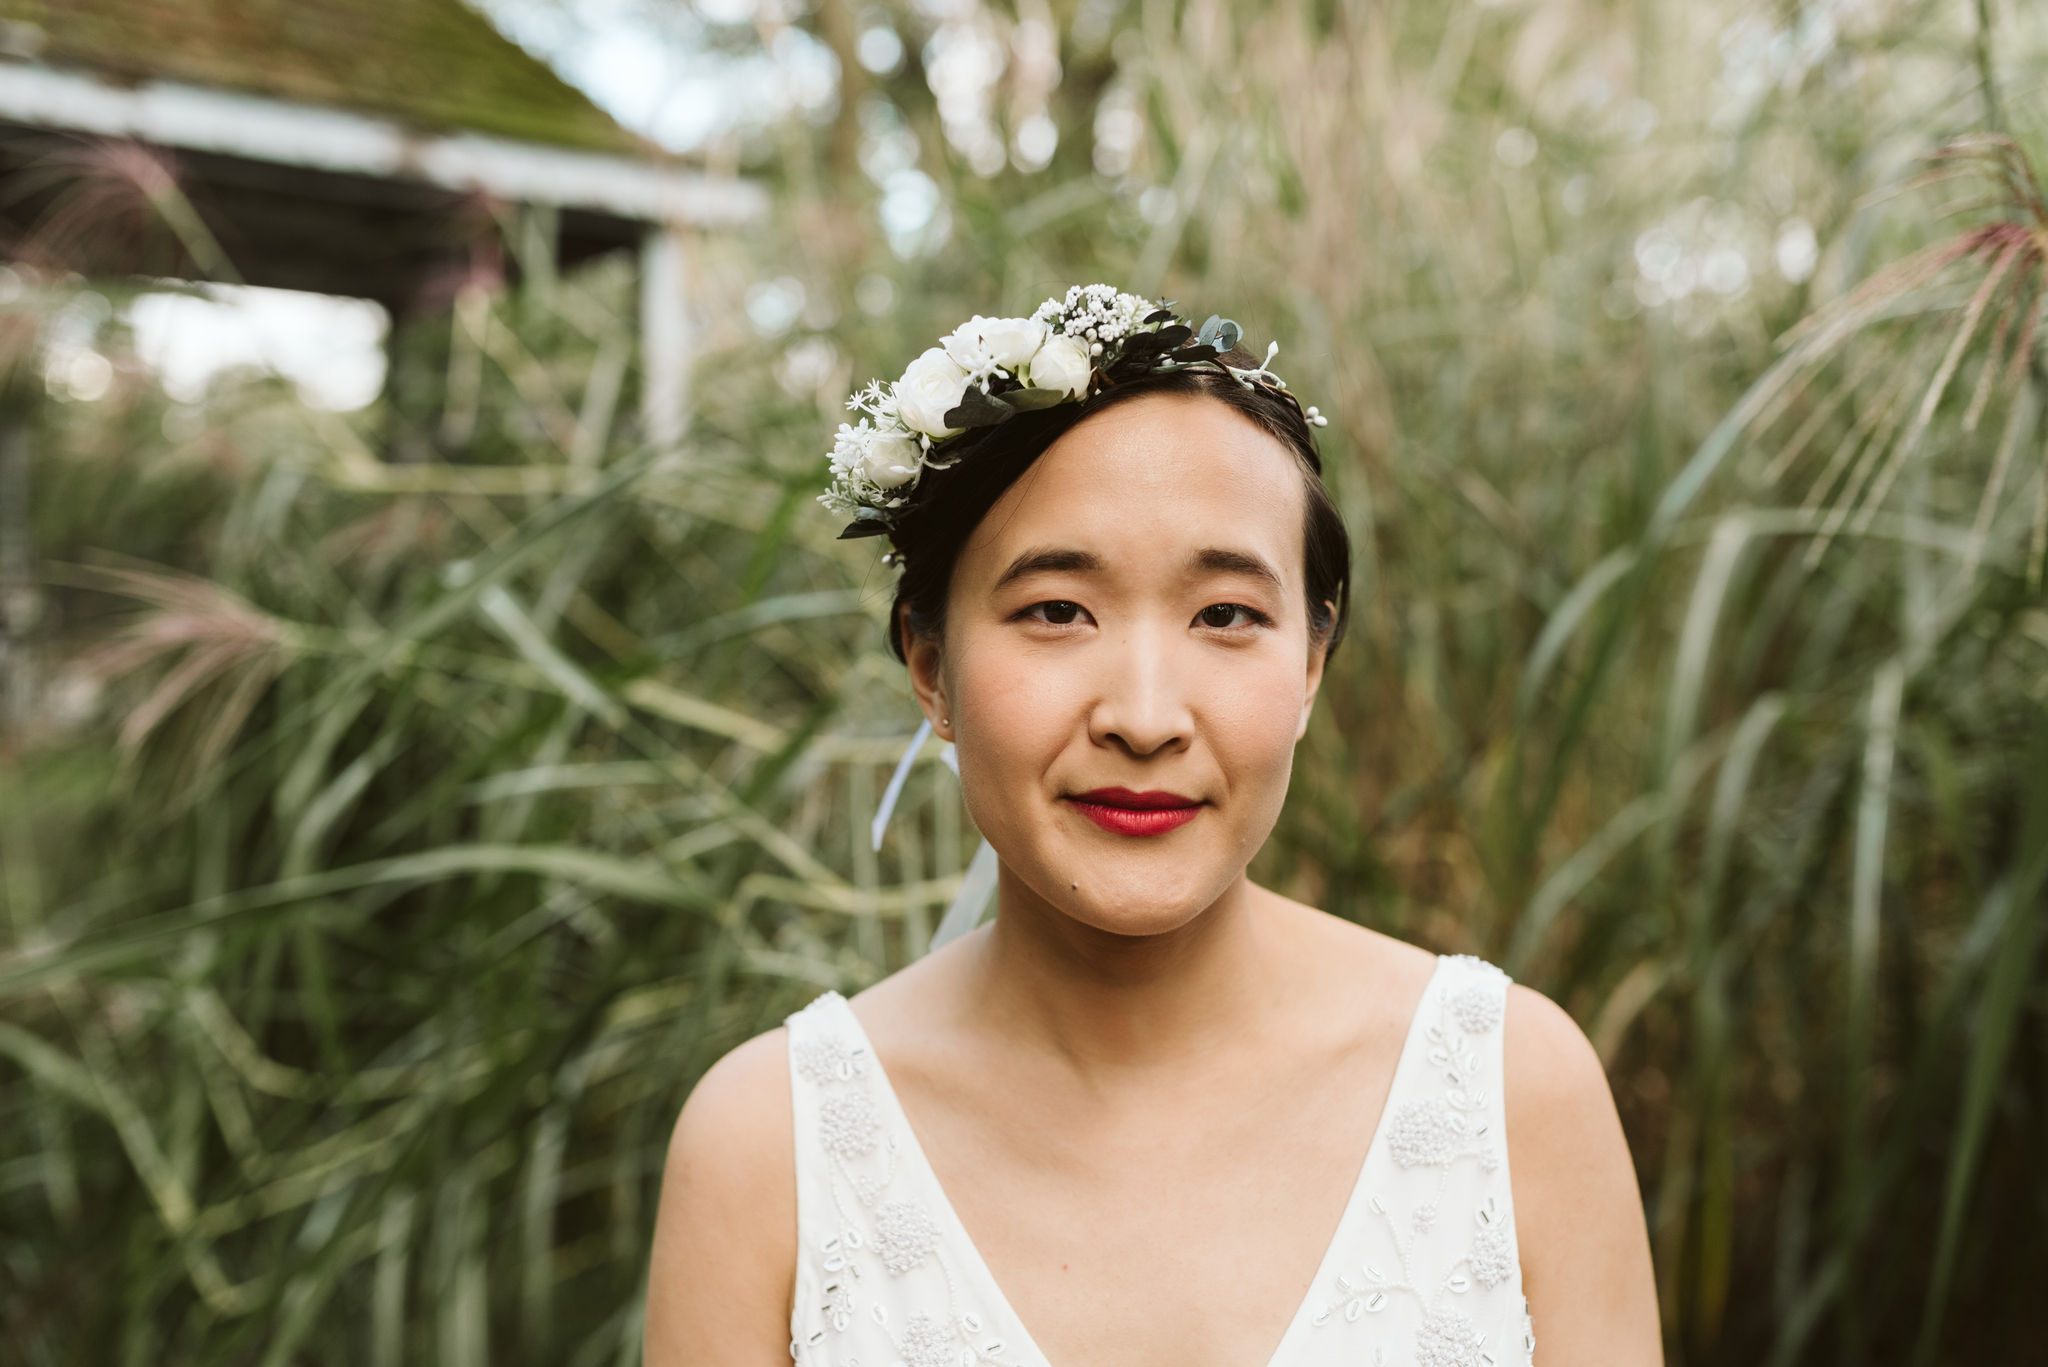  Baltimore, Maryland Wedding Photographer, The Mansion House at the Maryland Zoo, Relaxed, Romantic, Laid Back, Portrait of Bride, Flower Crown, Red Lipstick 